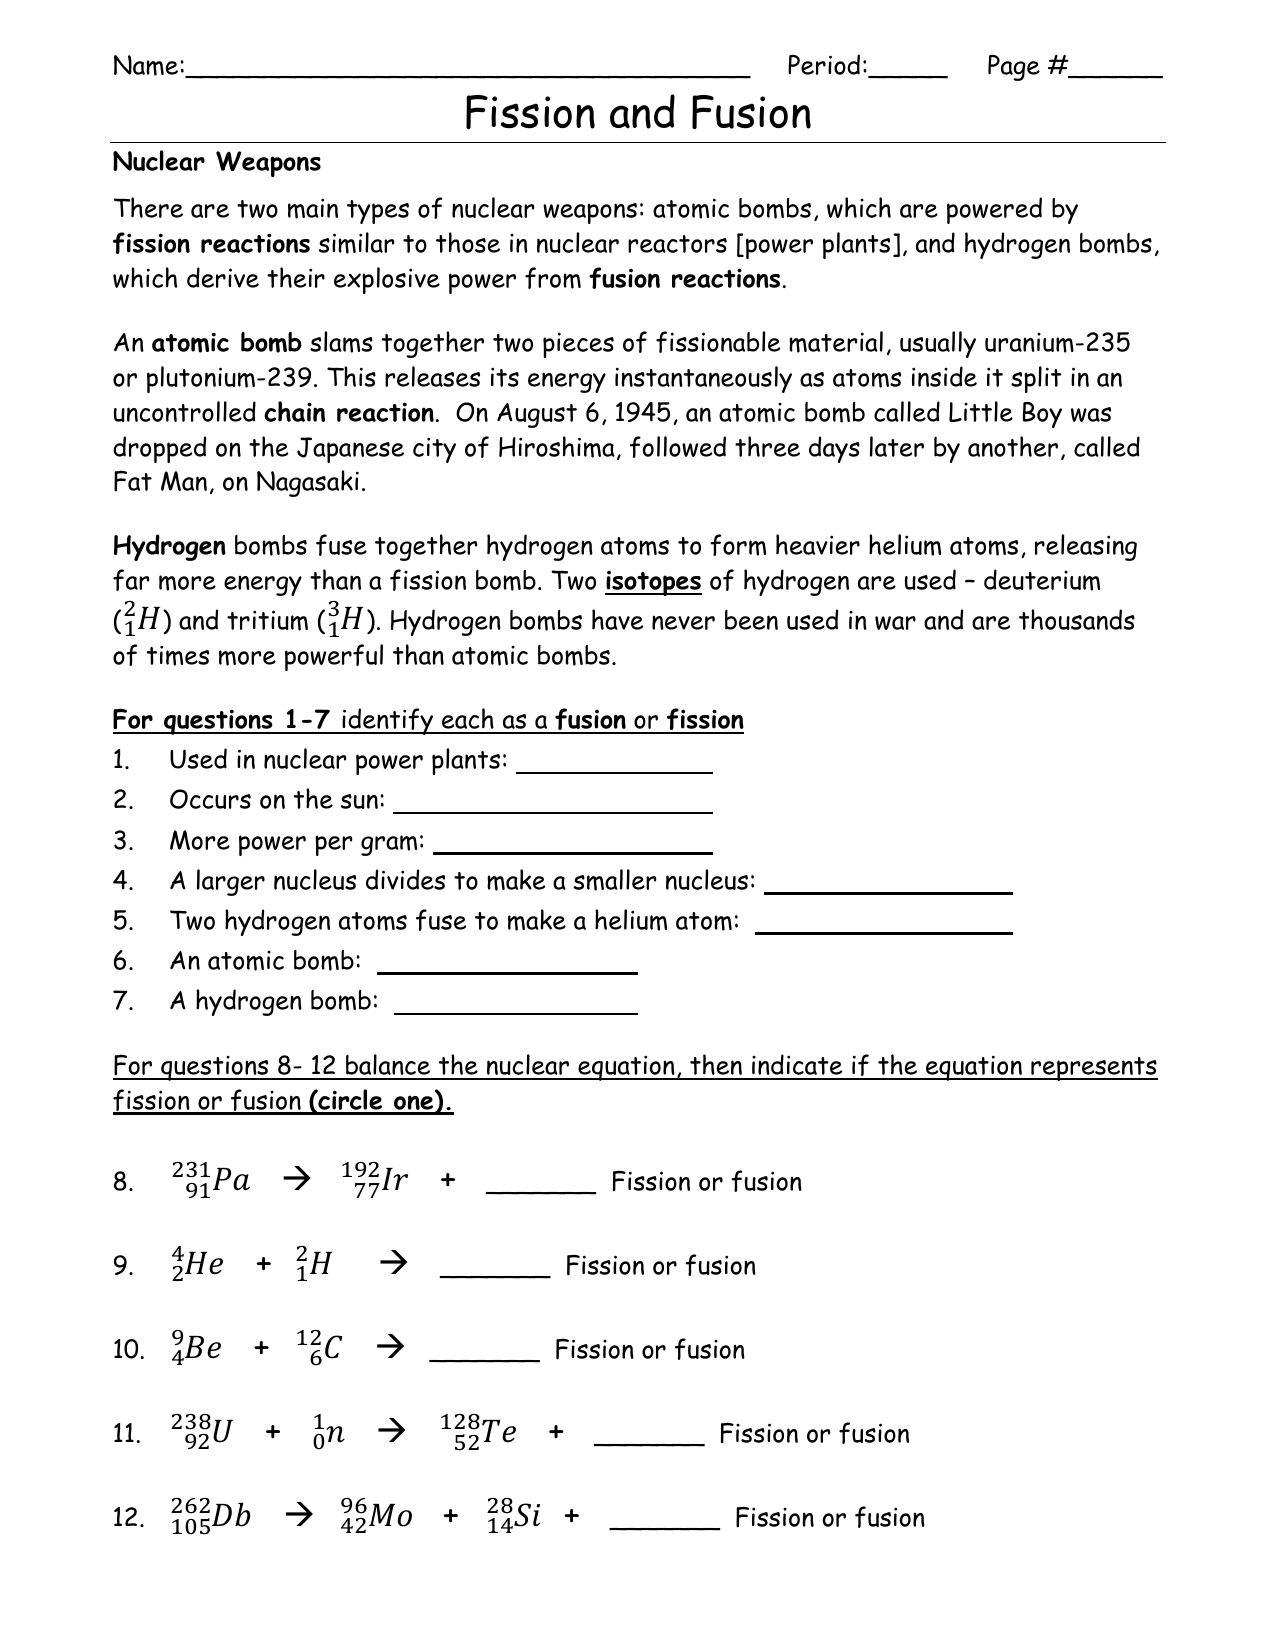 Fission vs Fusion Worksheet Within Nuclear Reactions Worksheet Answers